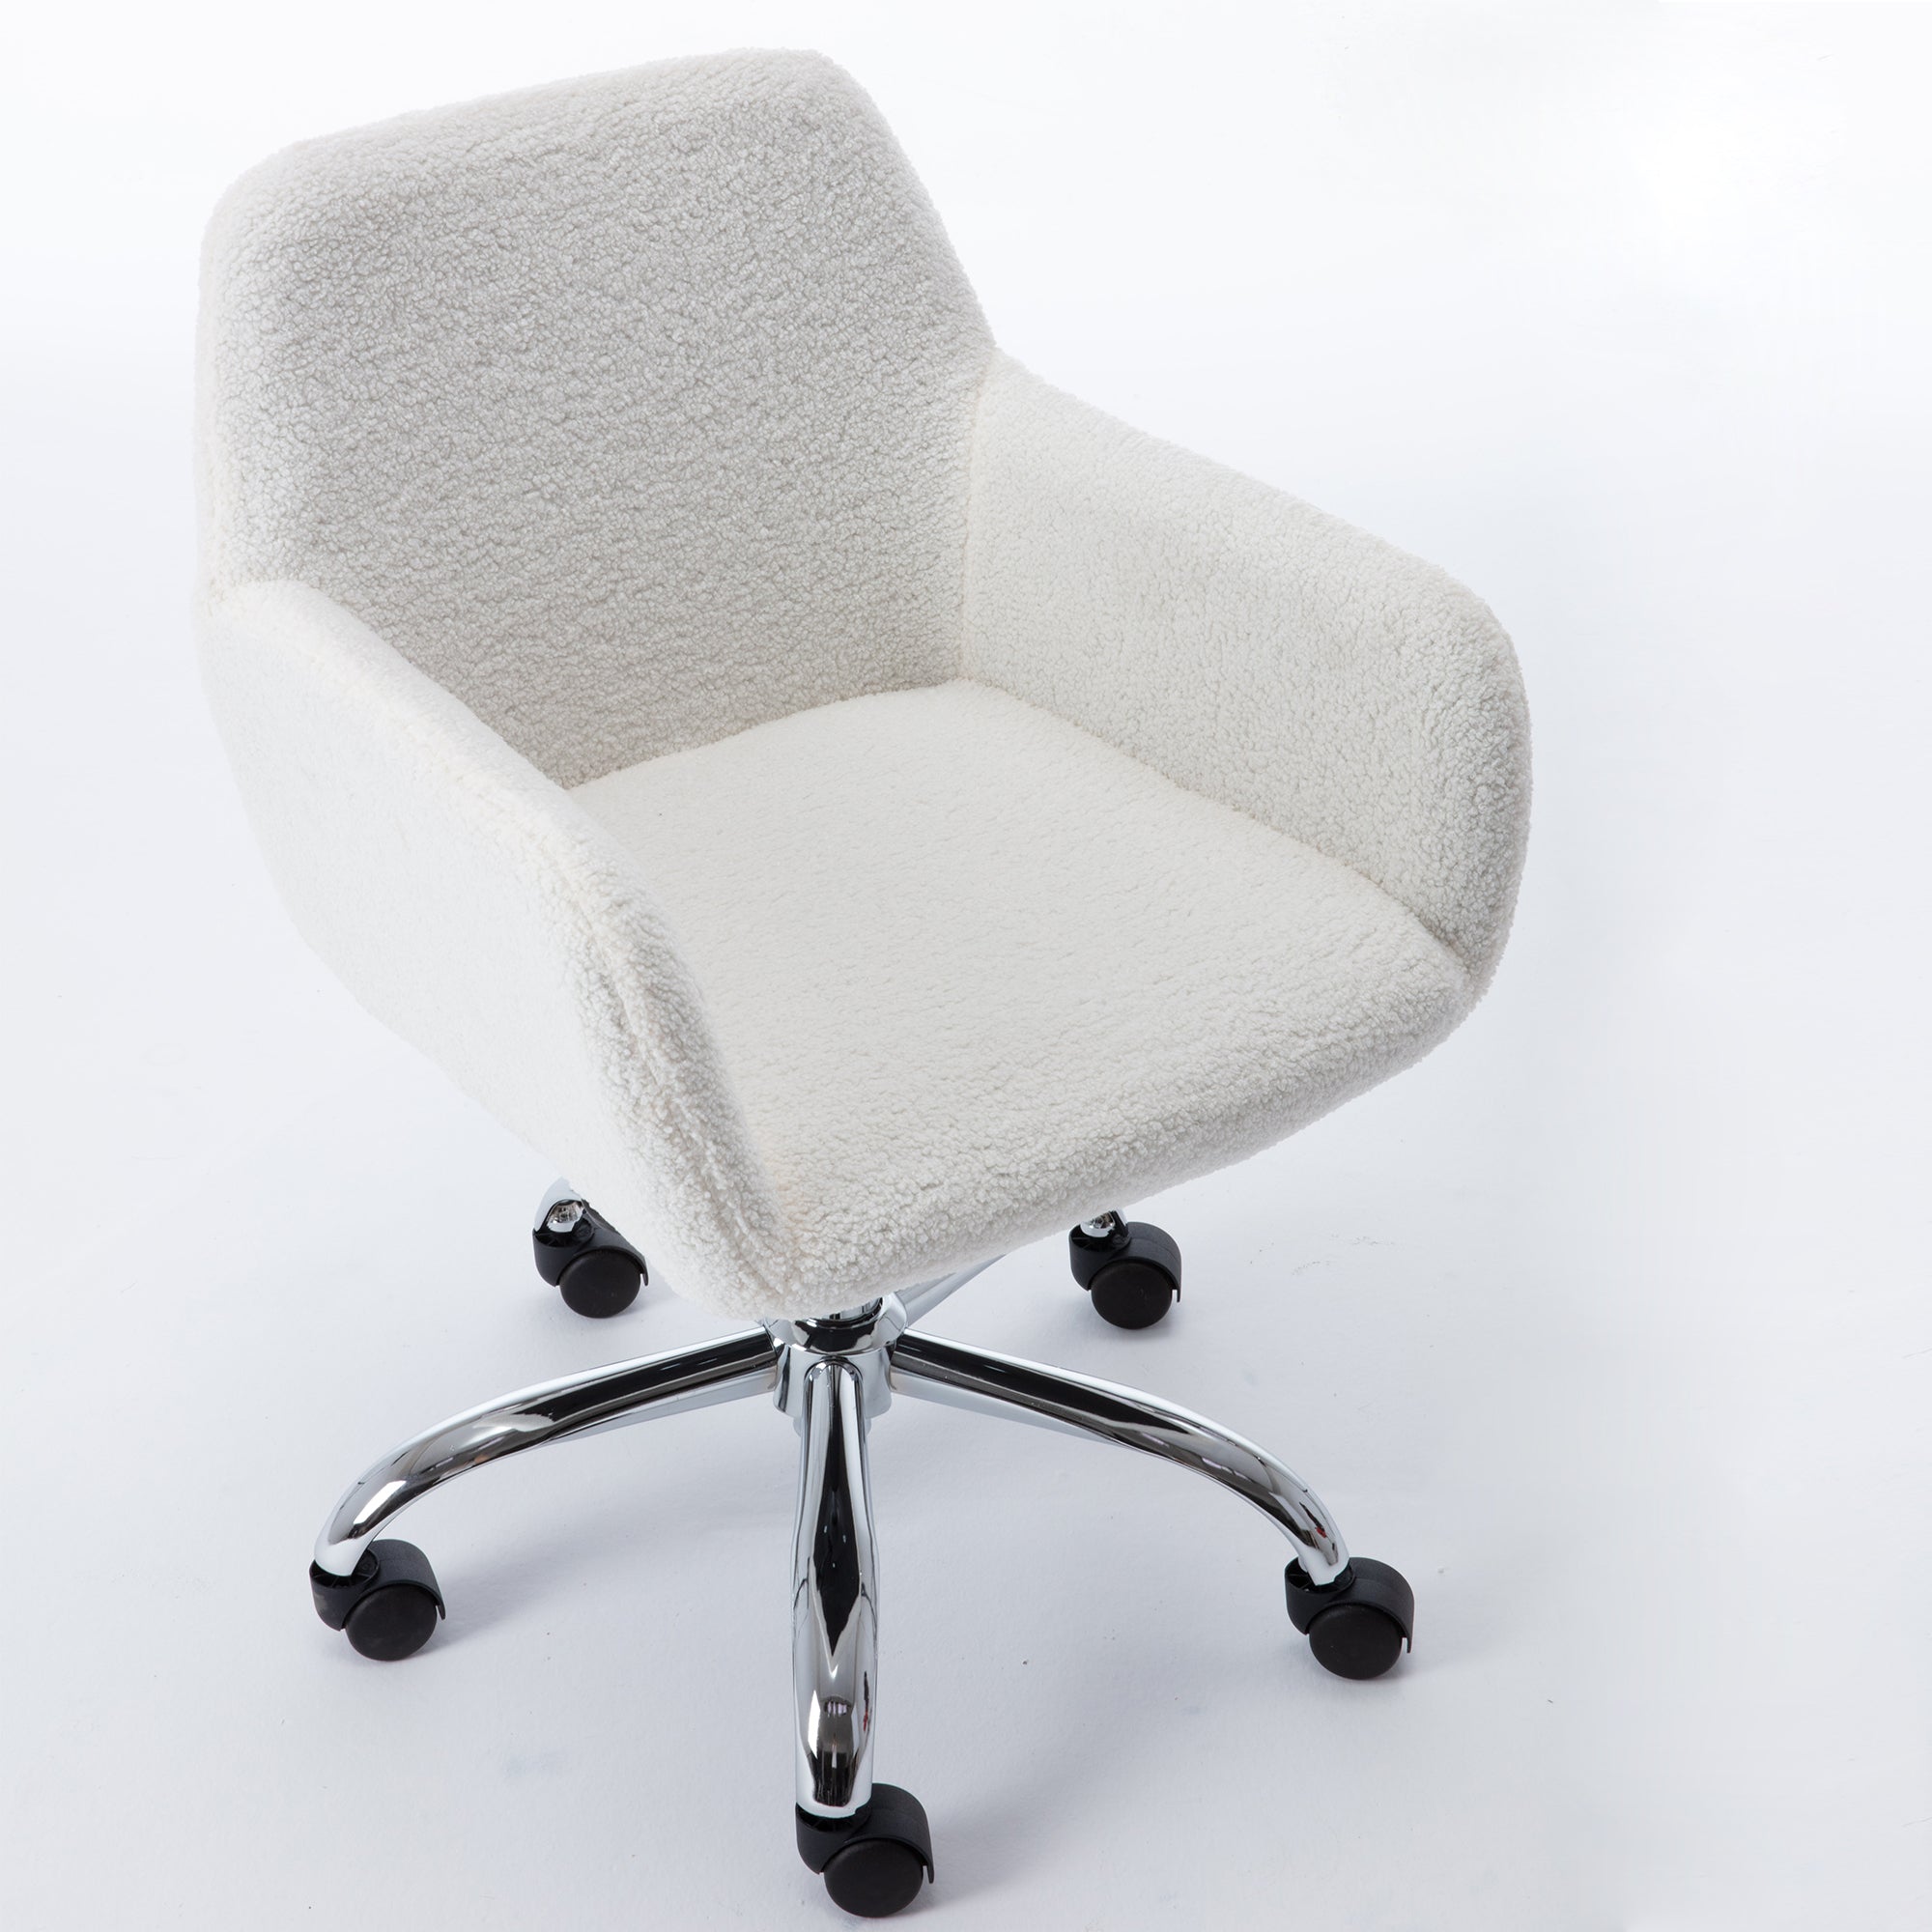 Home Office Chair, Leisure Chair Upholstered Adjustable furry Chair,  white